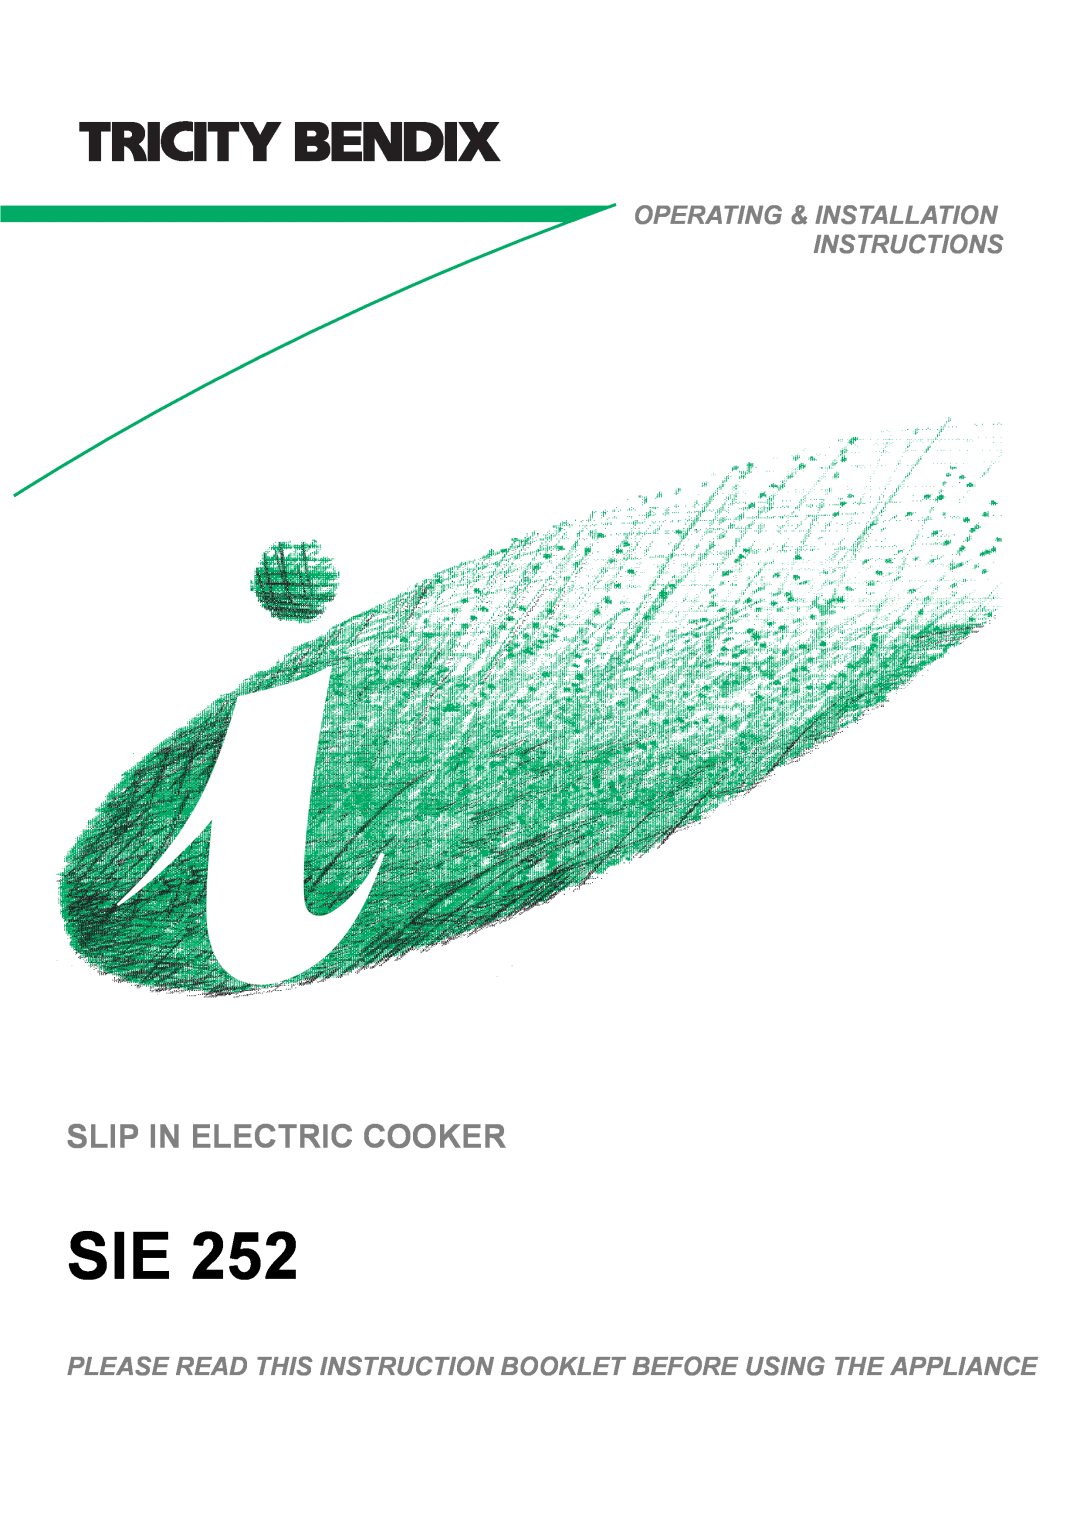 Tricity Bendix SIE 252 installation instructions Slip In Electric Cooker, Operating & Installation Instructions 